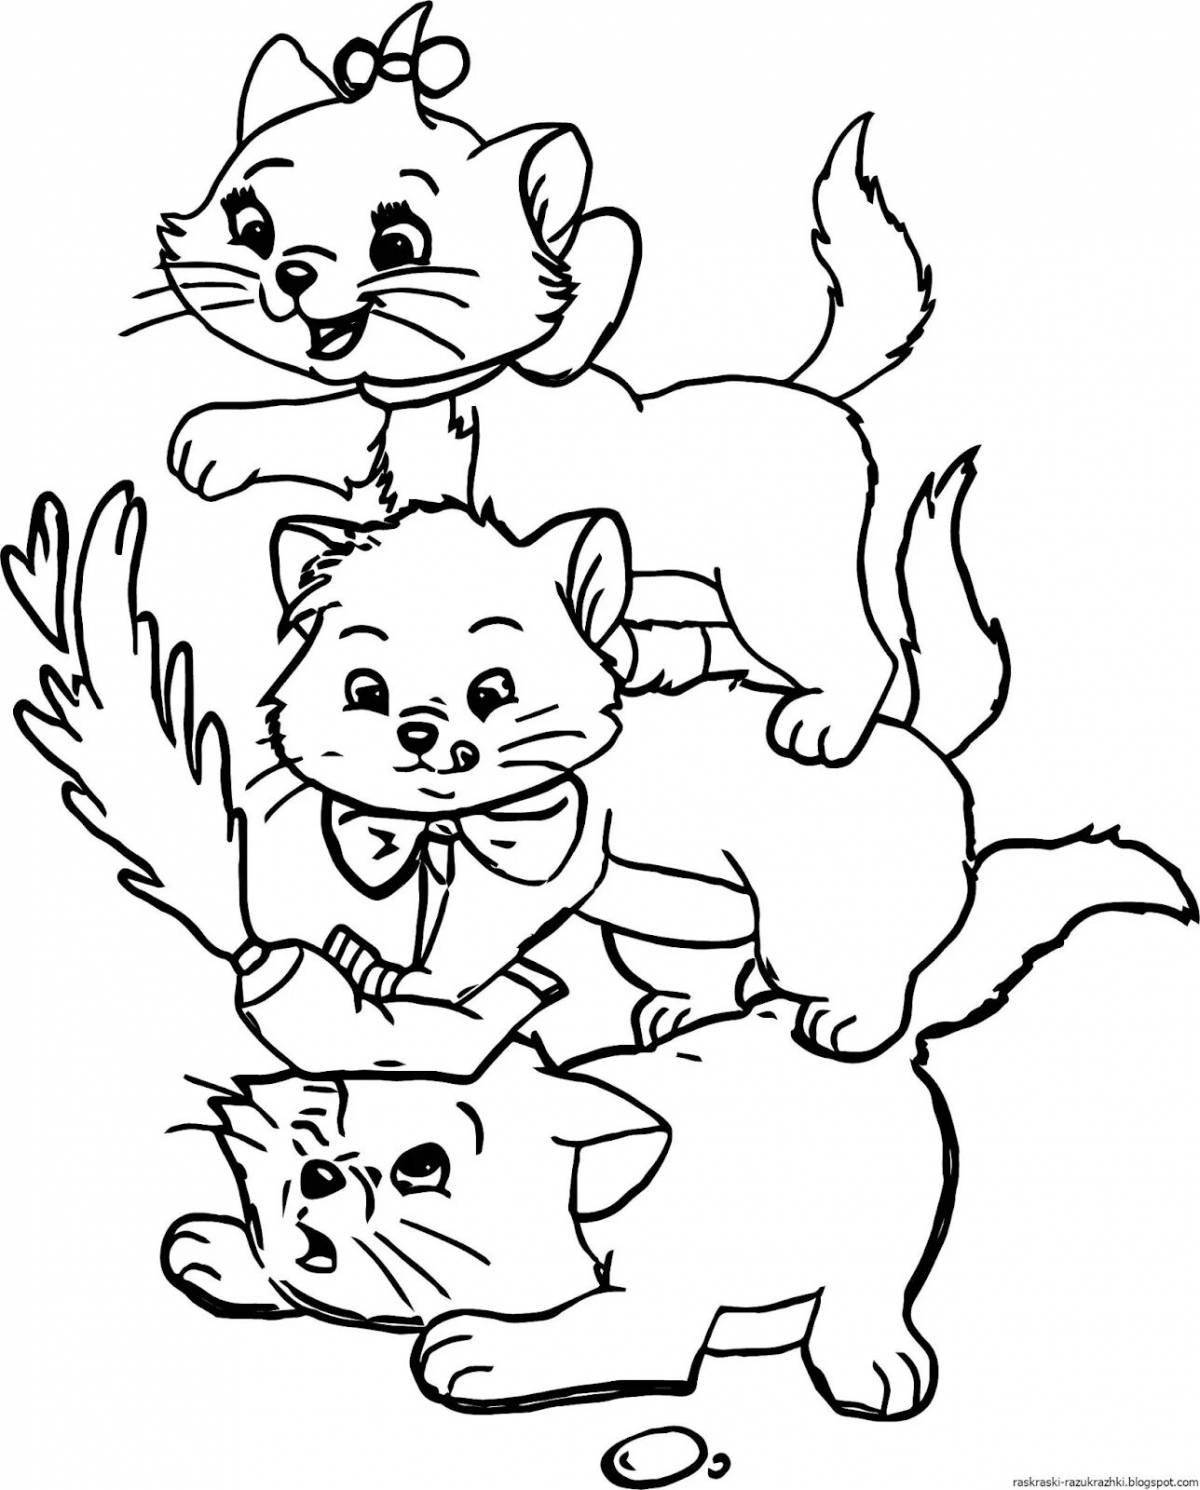 Curious cats and dogs coloring page